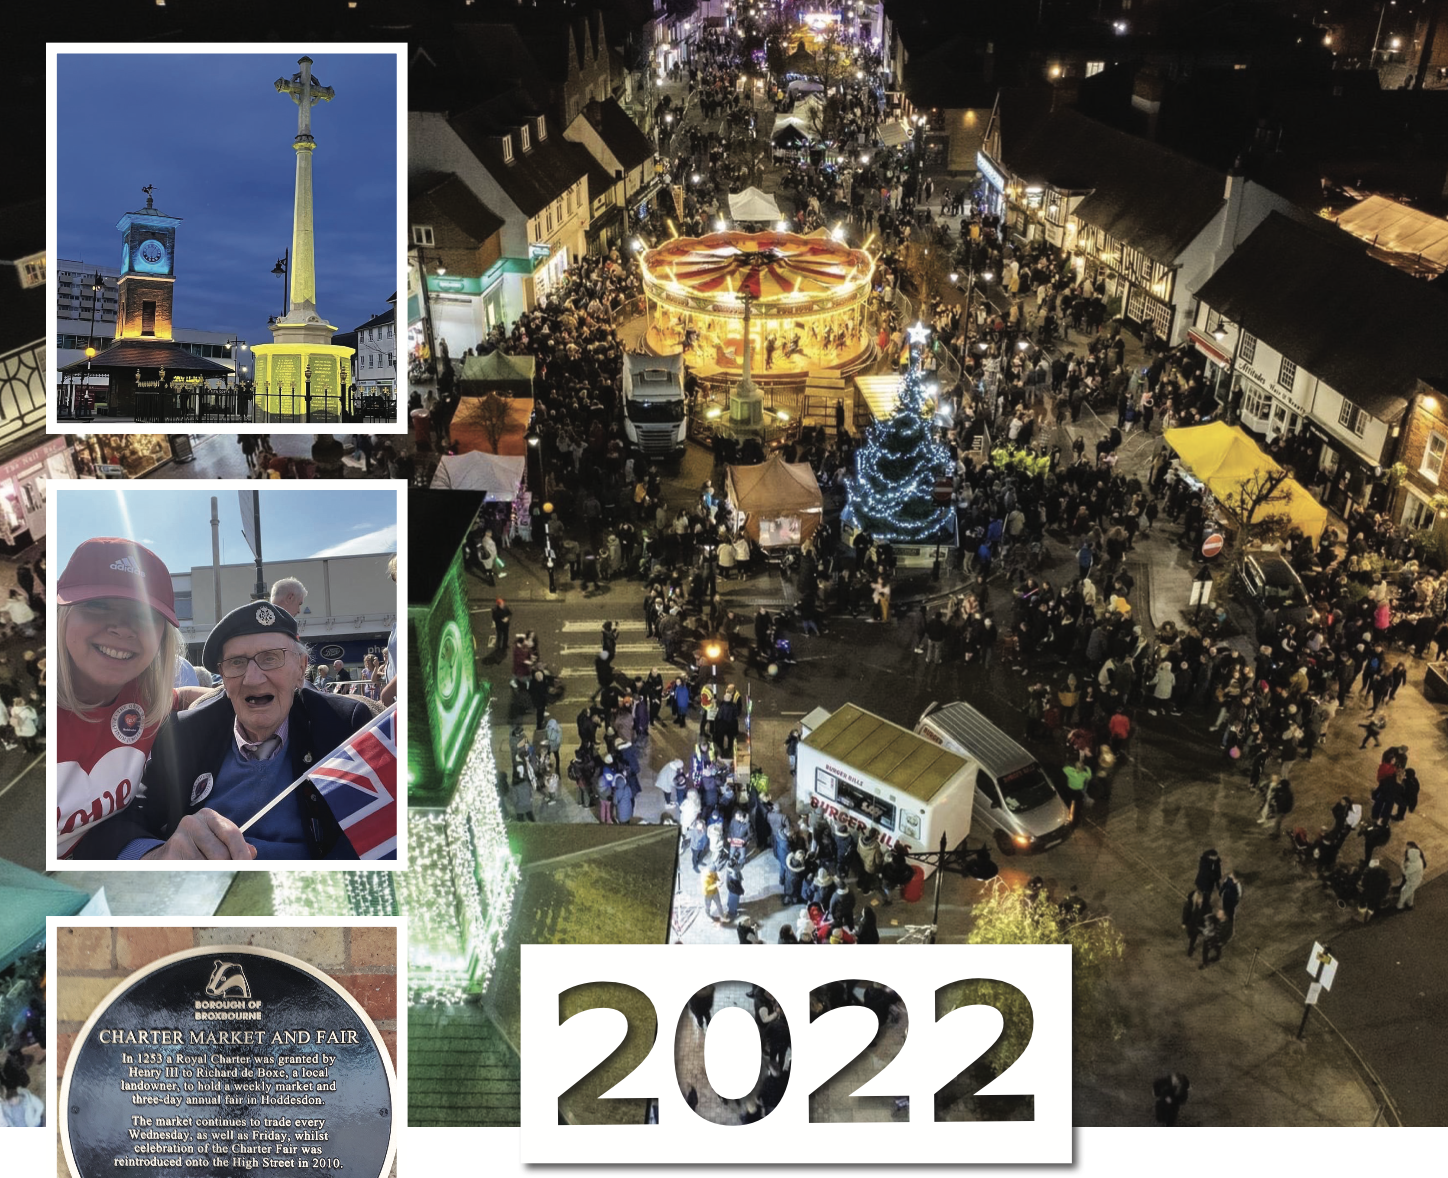 Love Hoddesdon issues Annual Report